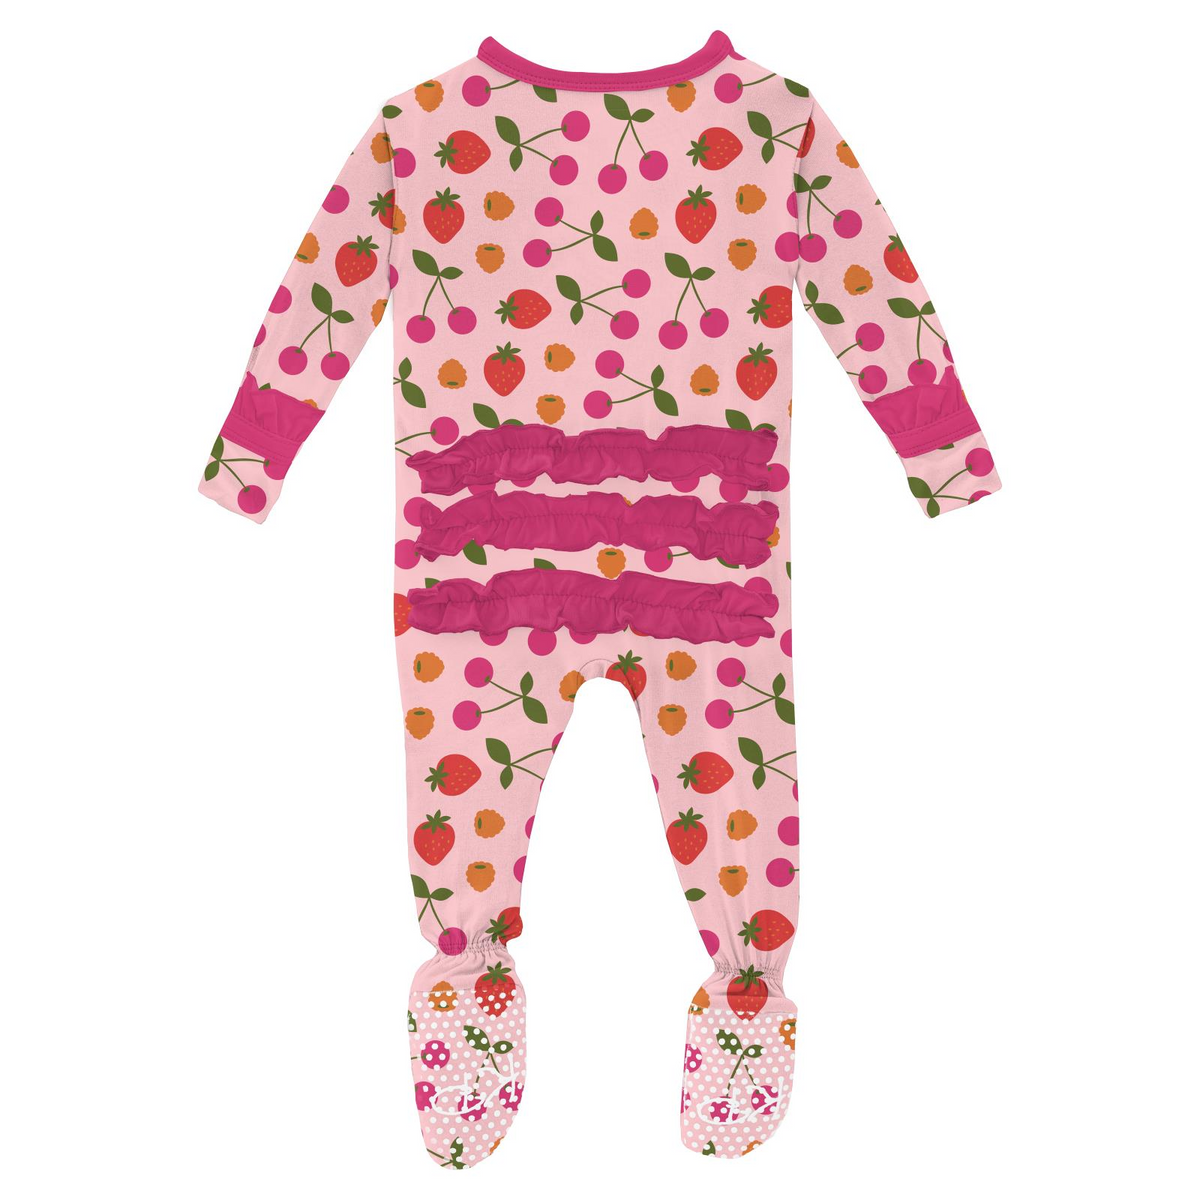 Lotus Berries Print Classic Ruffle Footie with Snaps